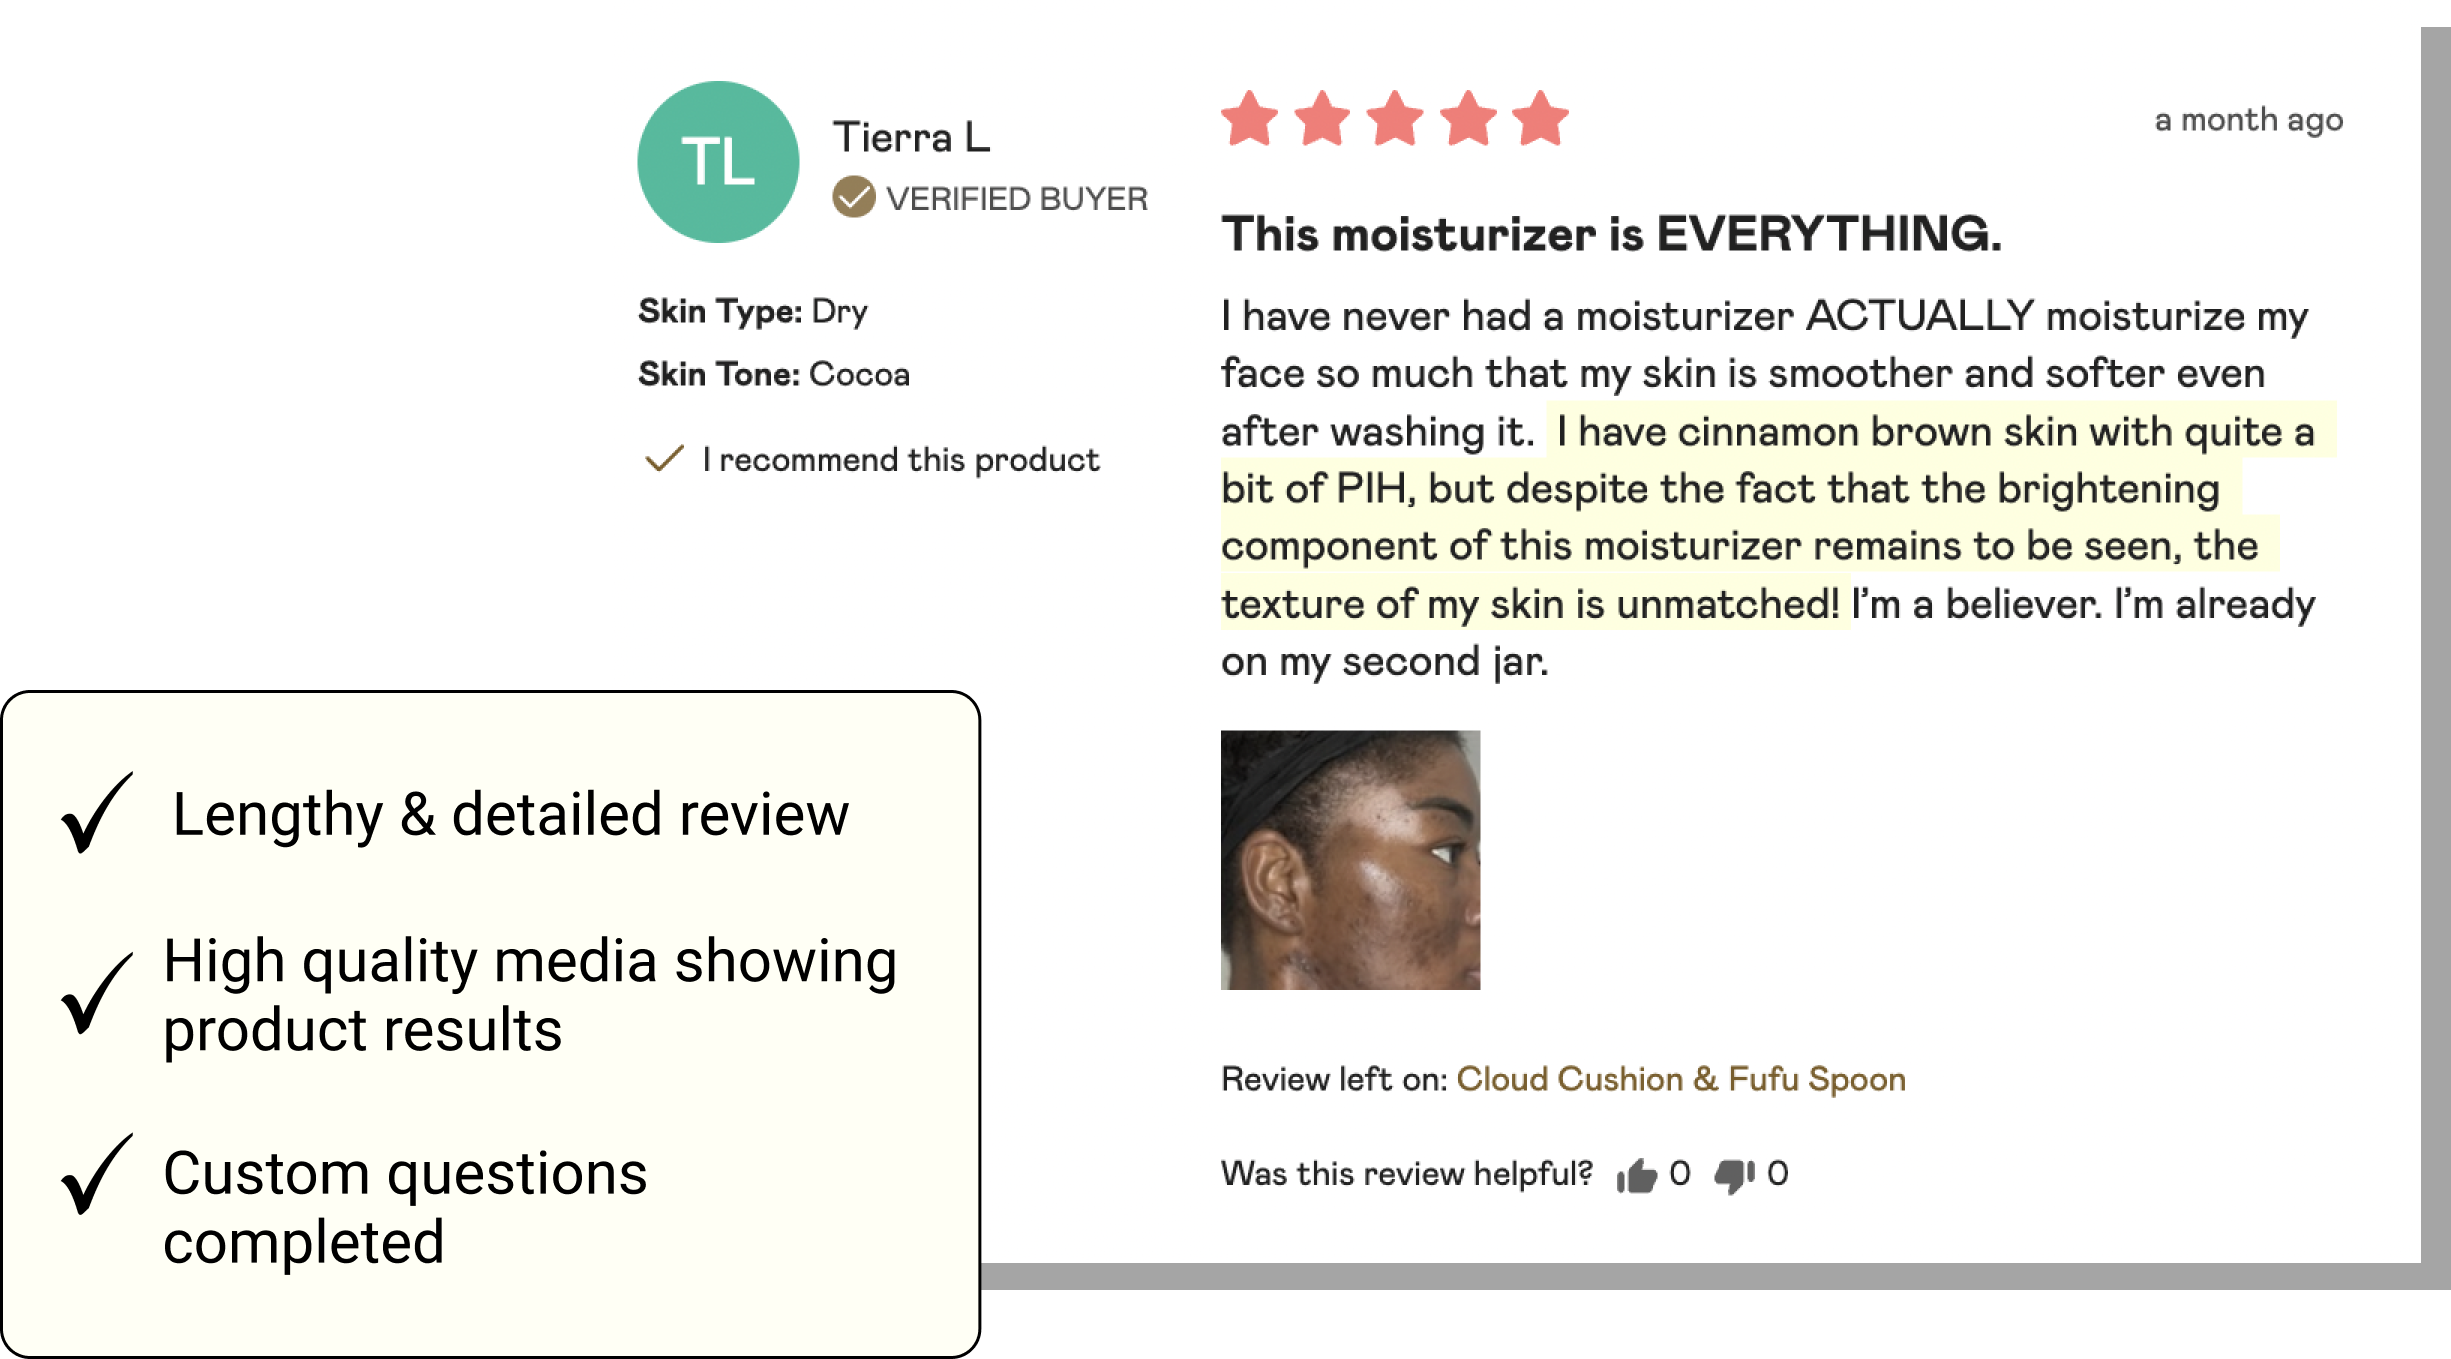 Example of a high quality review